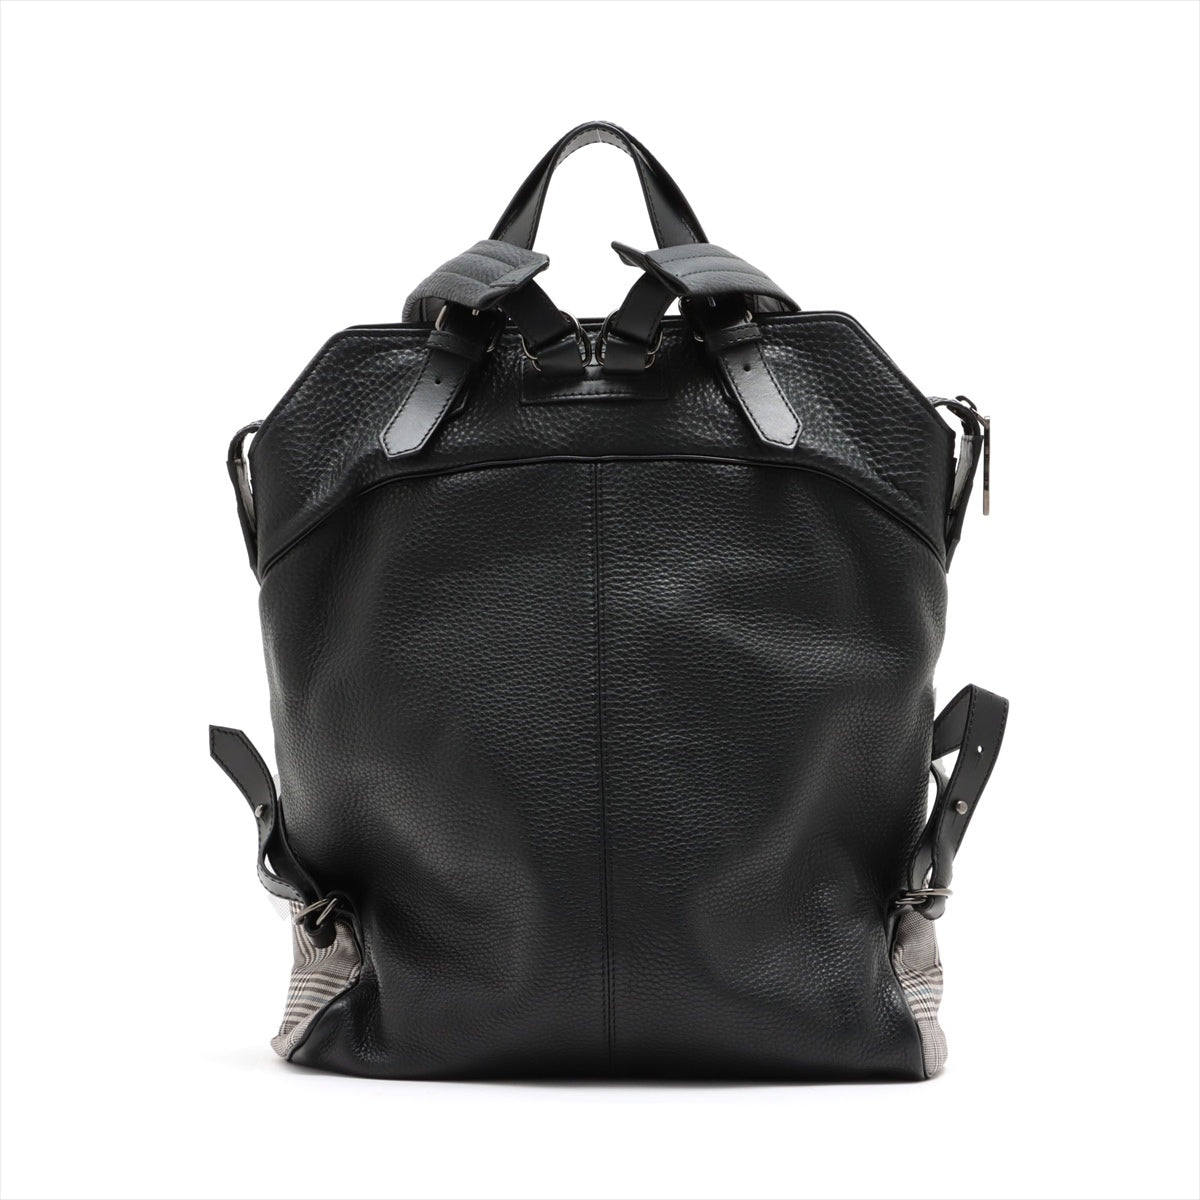 Christian Louboutin leather x studs Backpack Black